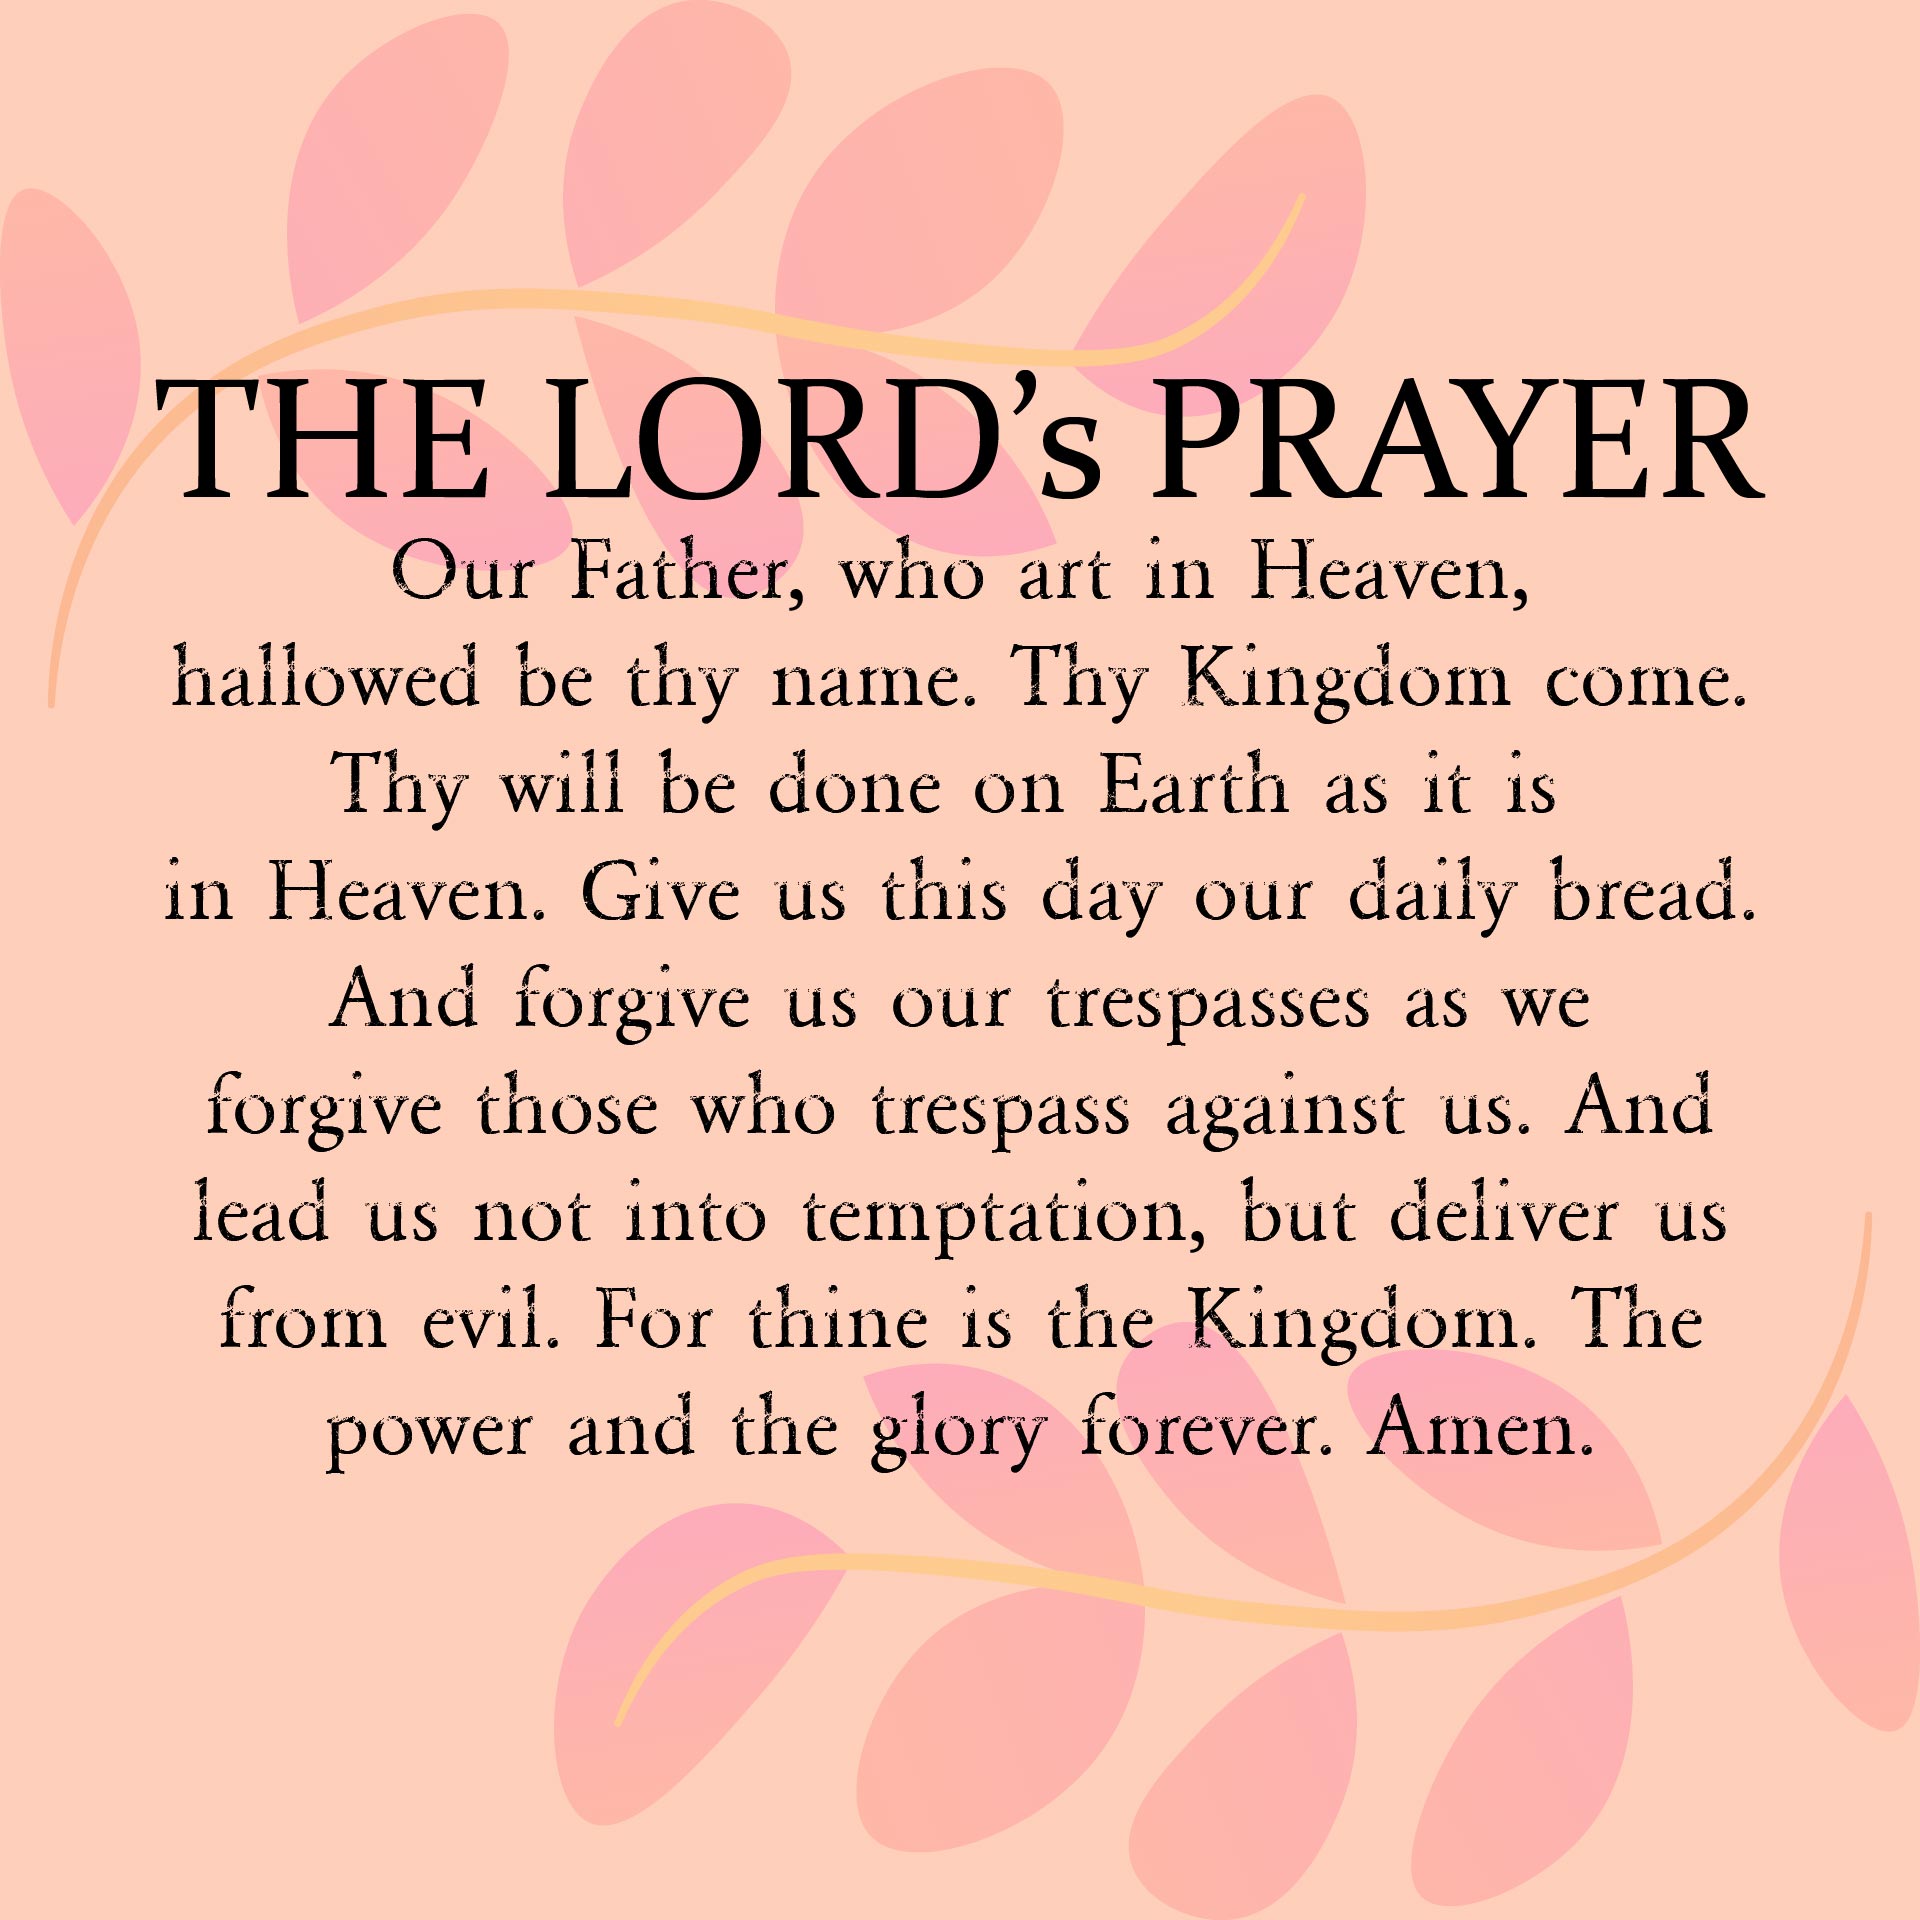 8-best-images-of-the-lord-prayer-printable-lord-s-prayer-to-print